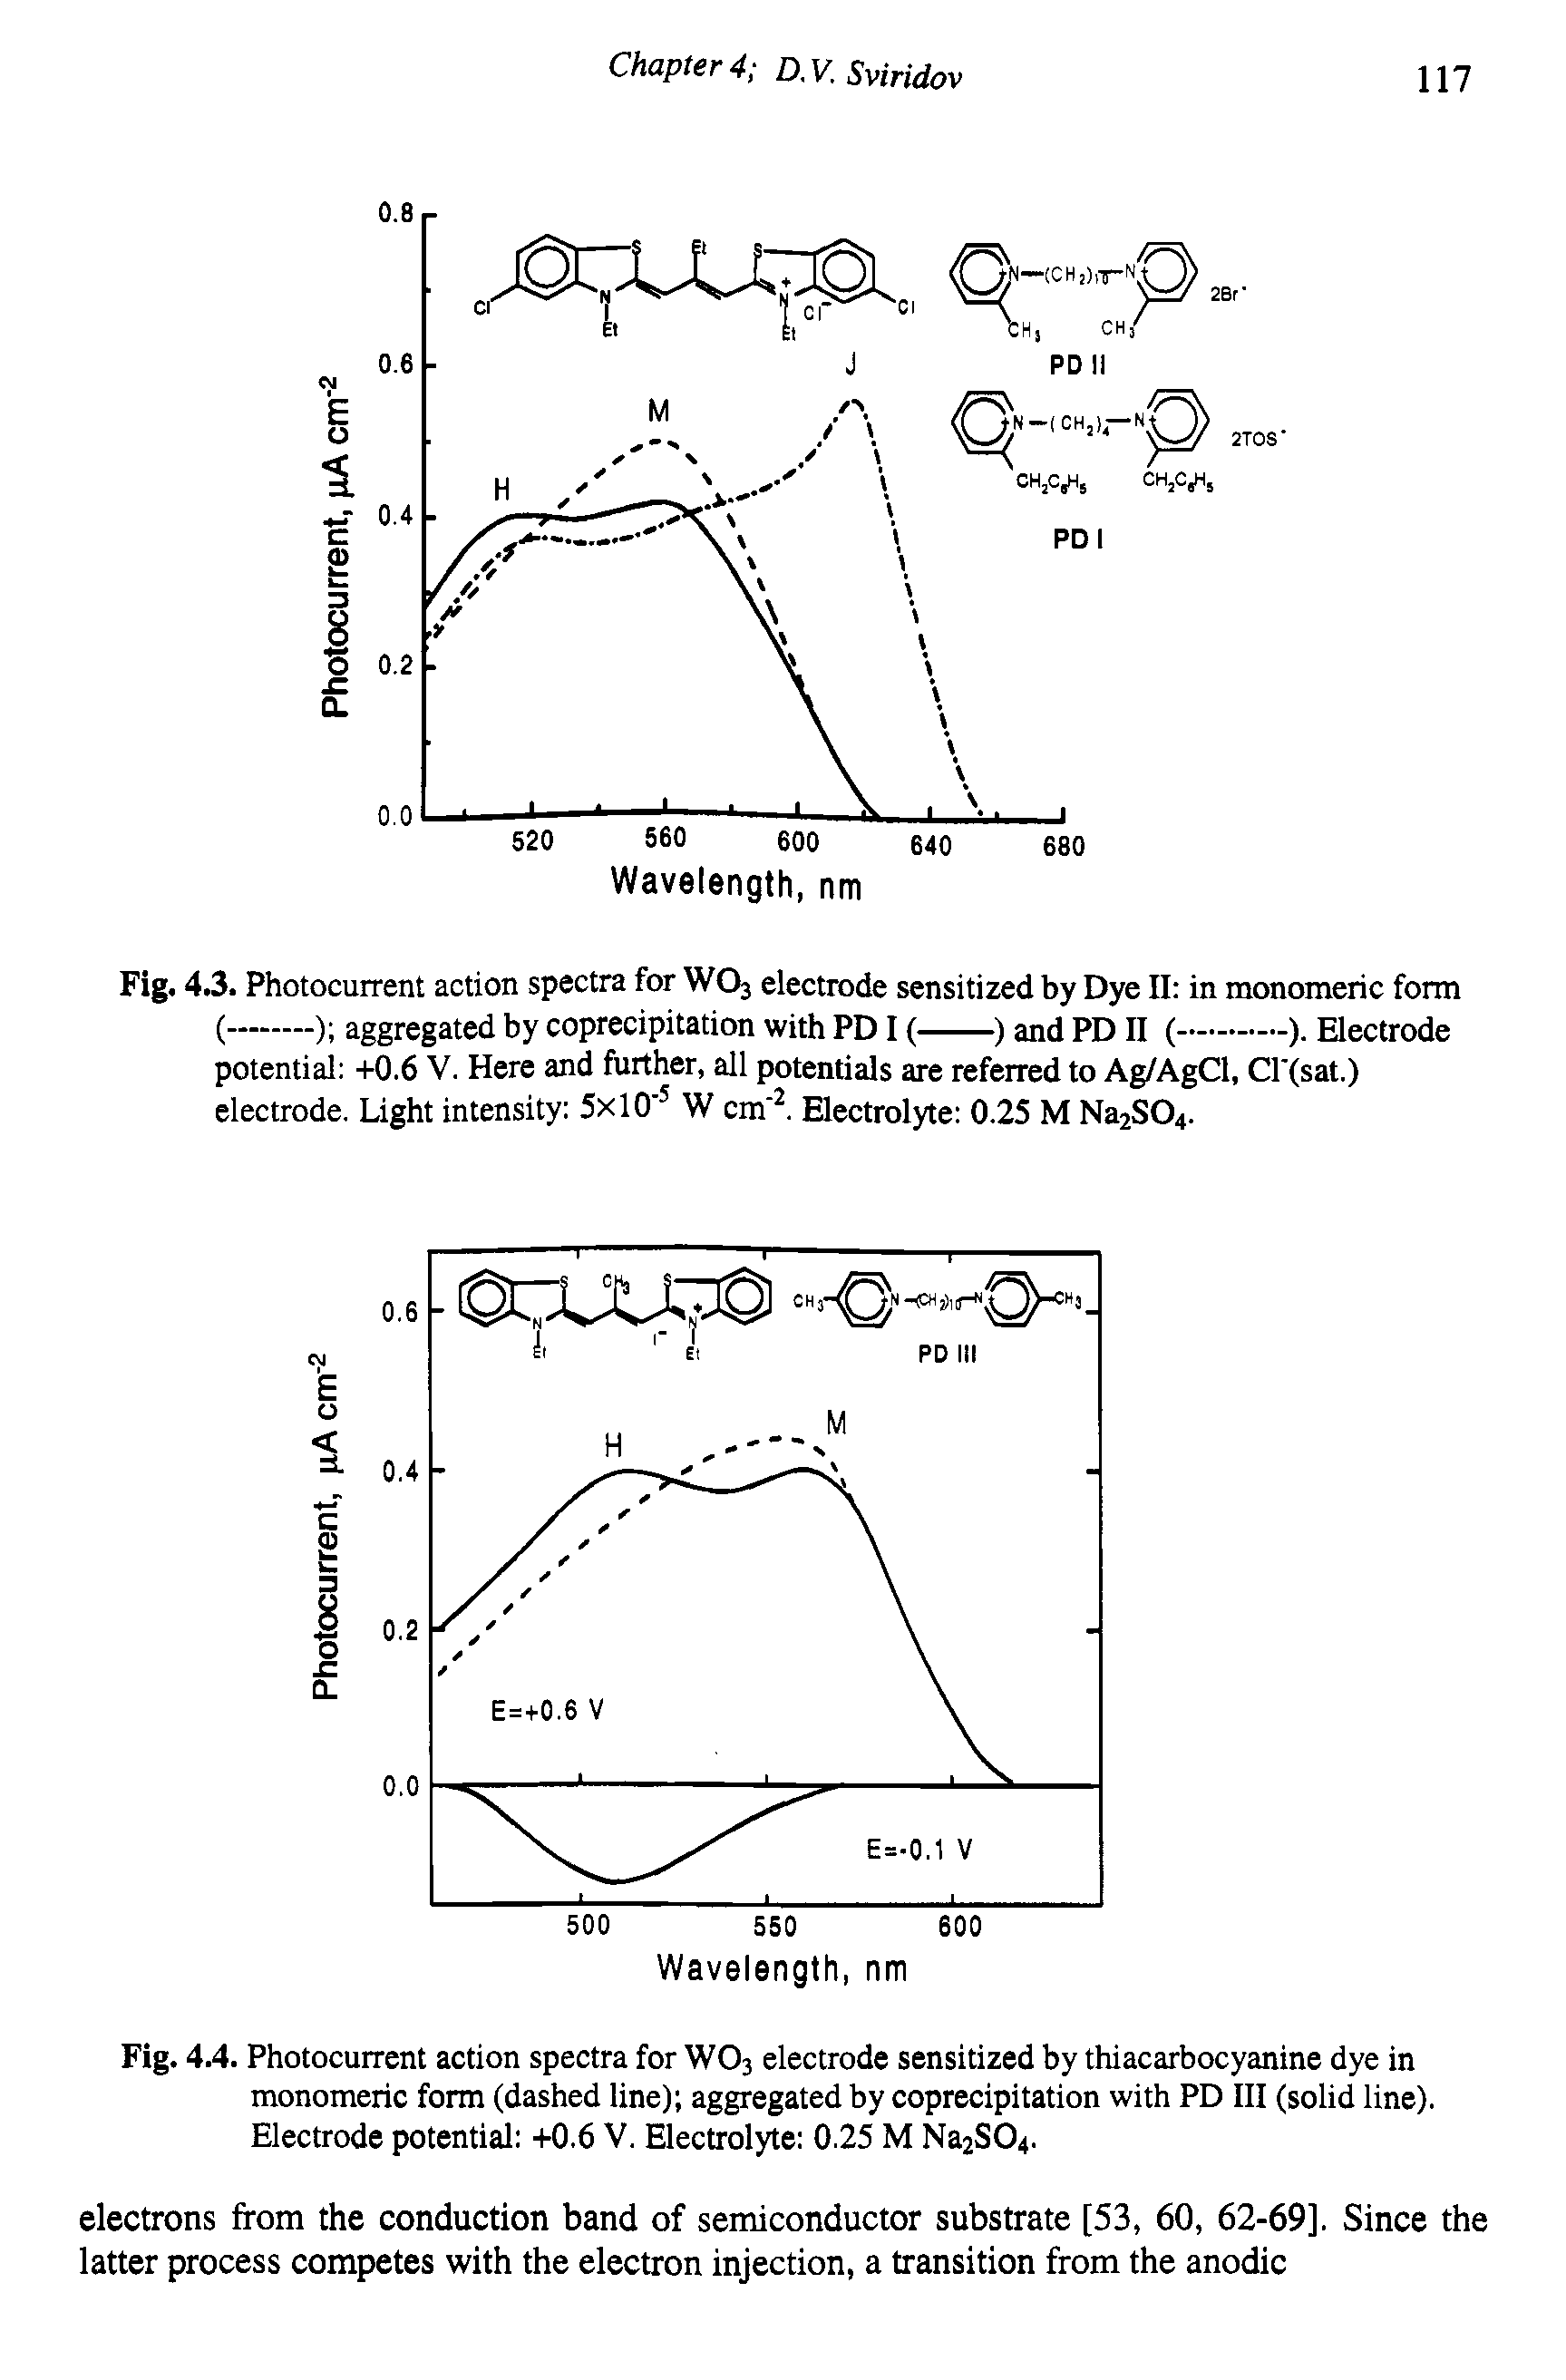 Fig. 4.4. Photocurrent action spectra for W03 electrode sensitized by thiacarbocyanine dye in monomeric form (dashed line) aggregated by coprecipitation with PD III (solid line). Electrode potential +0.6 V. Electrolyte 0.25 M Na2S04.